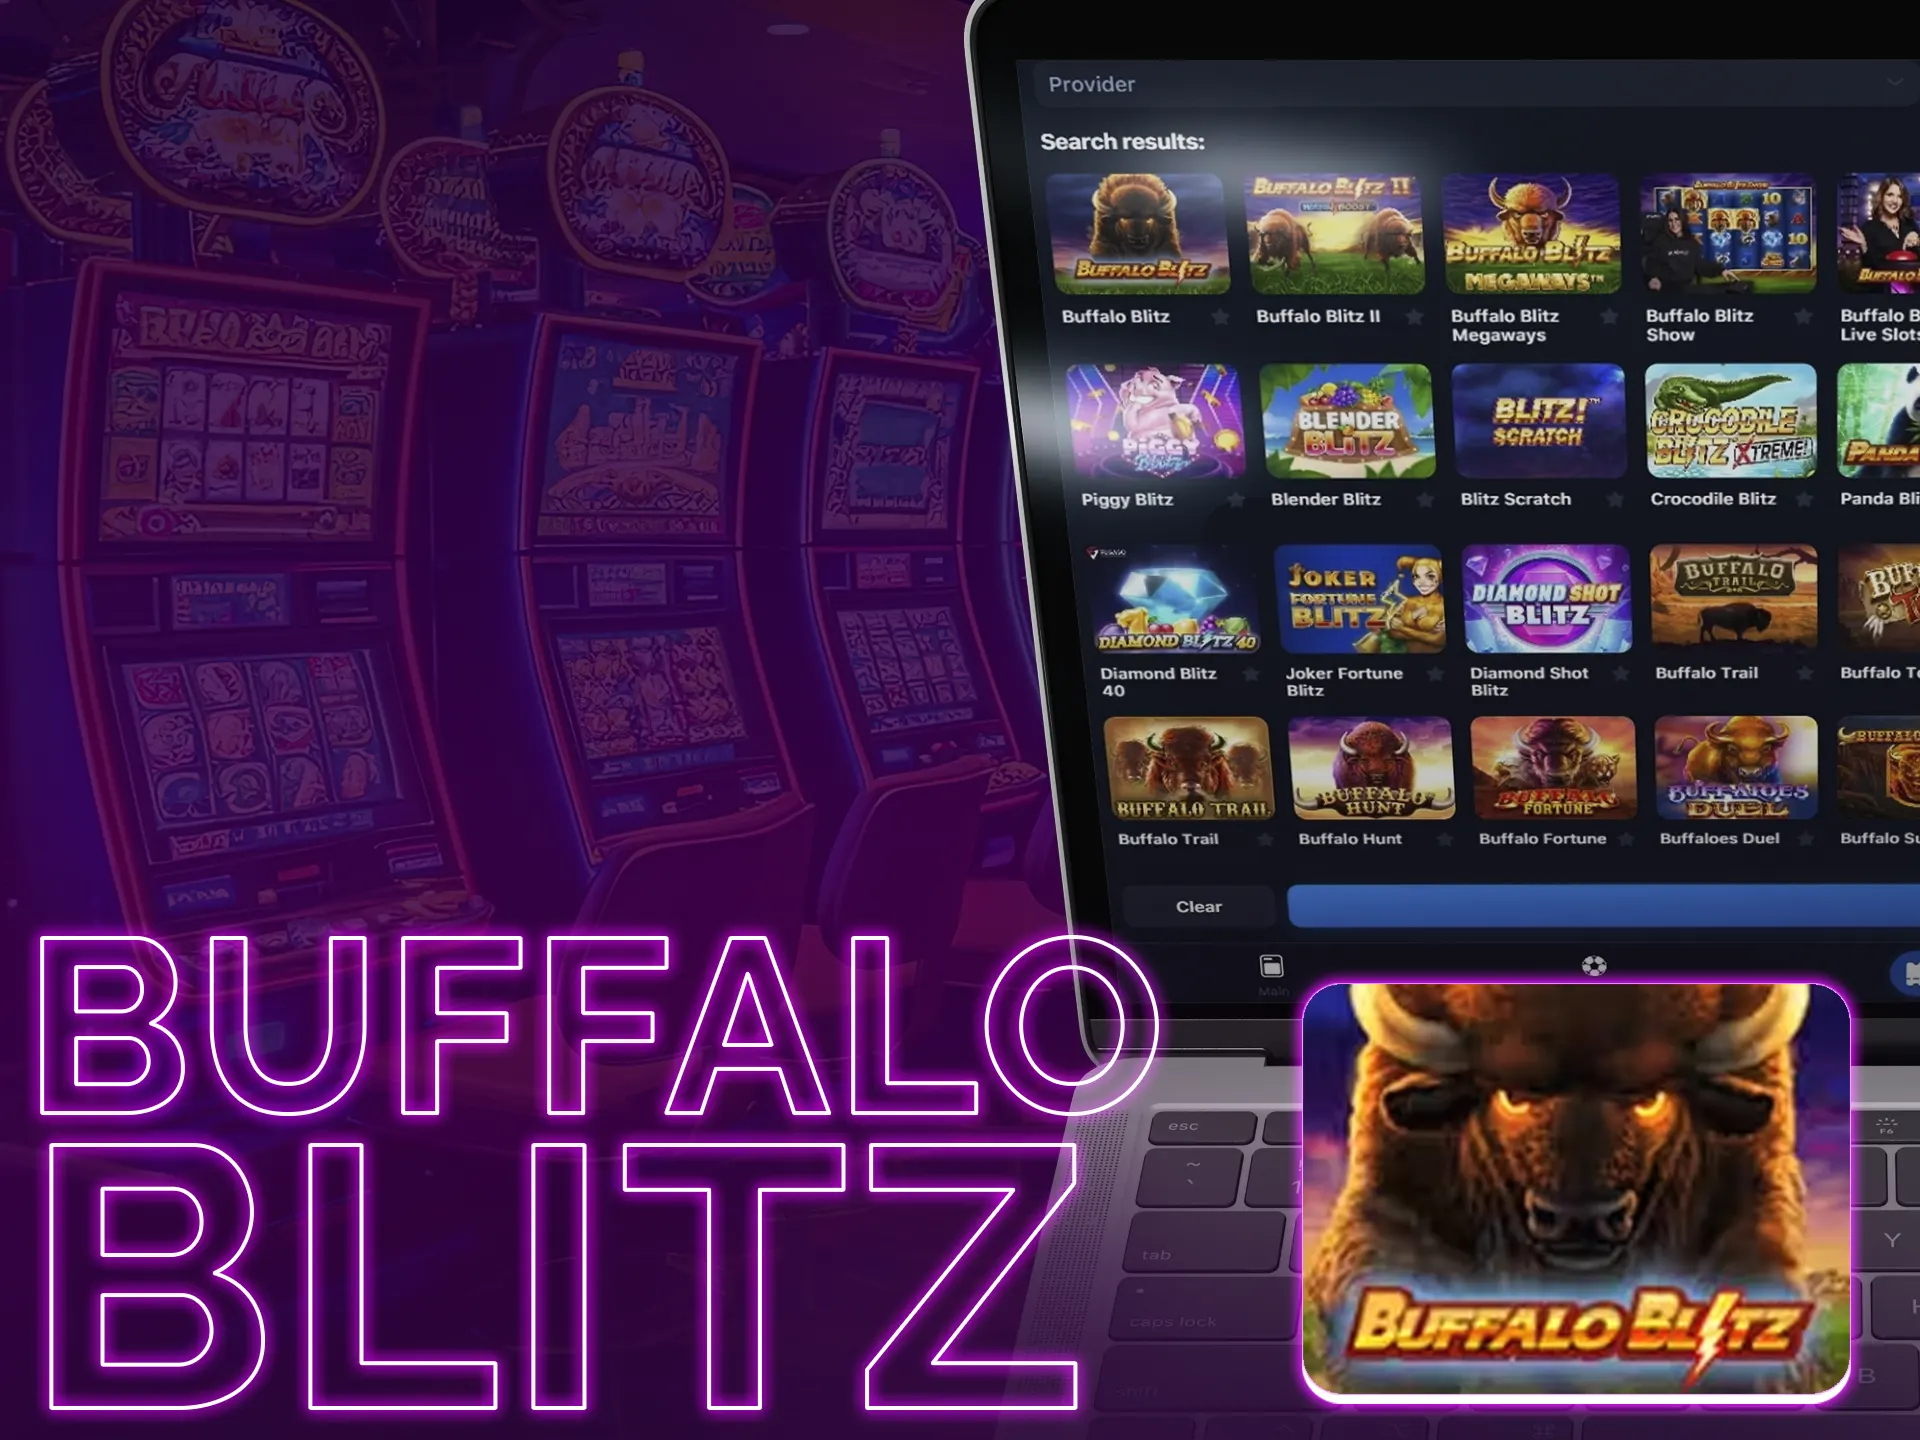 Buffalo Blitz: Exciting slot with wild animals, 6x4 reels, high RTP.